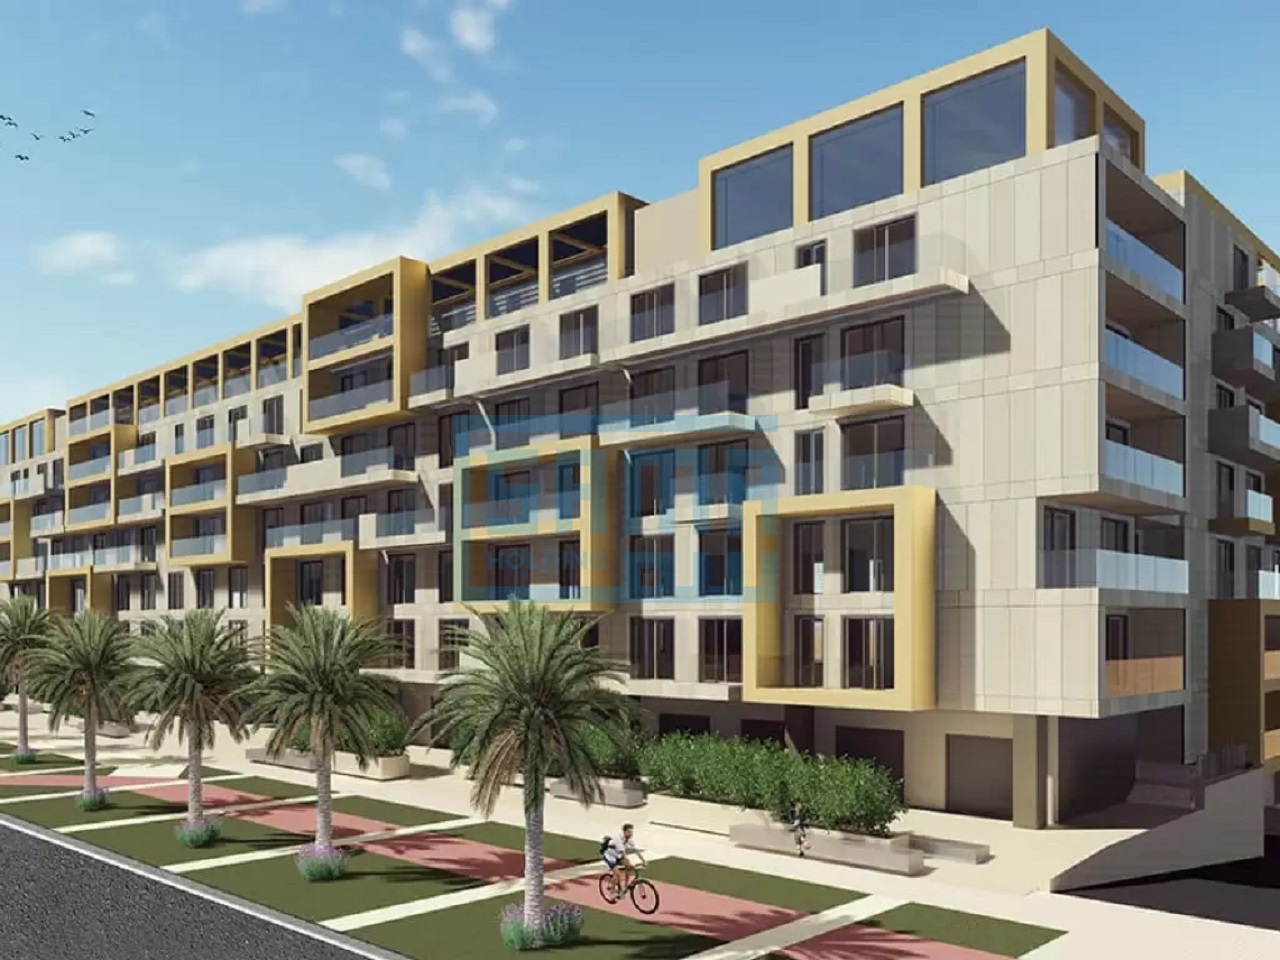 Affordable Store for Sale in Abu Dhabi, Al Raha Lofts 2 – Completed